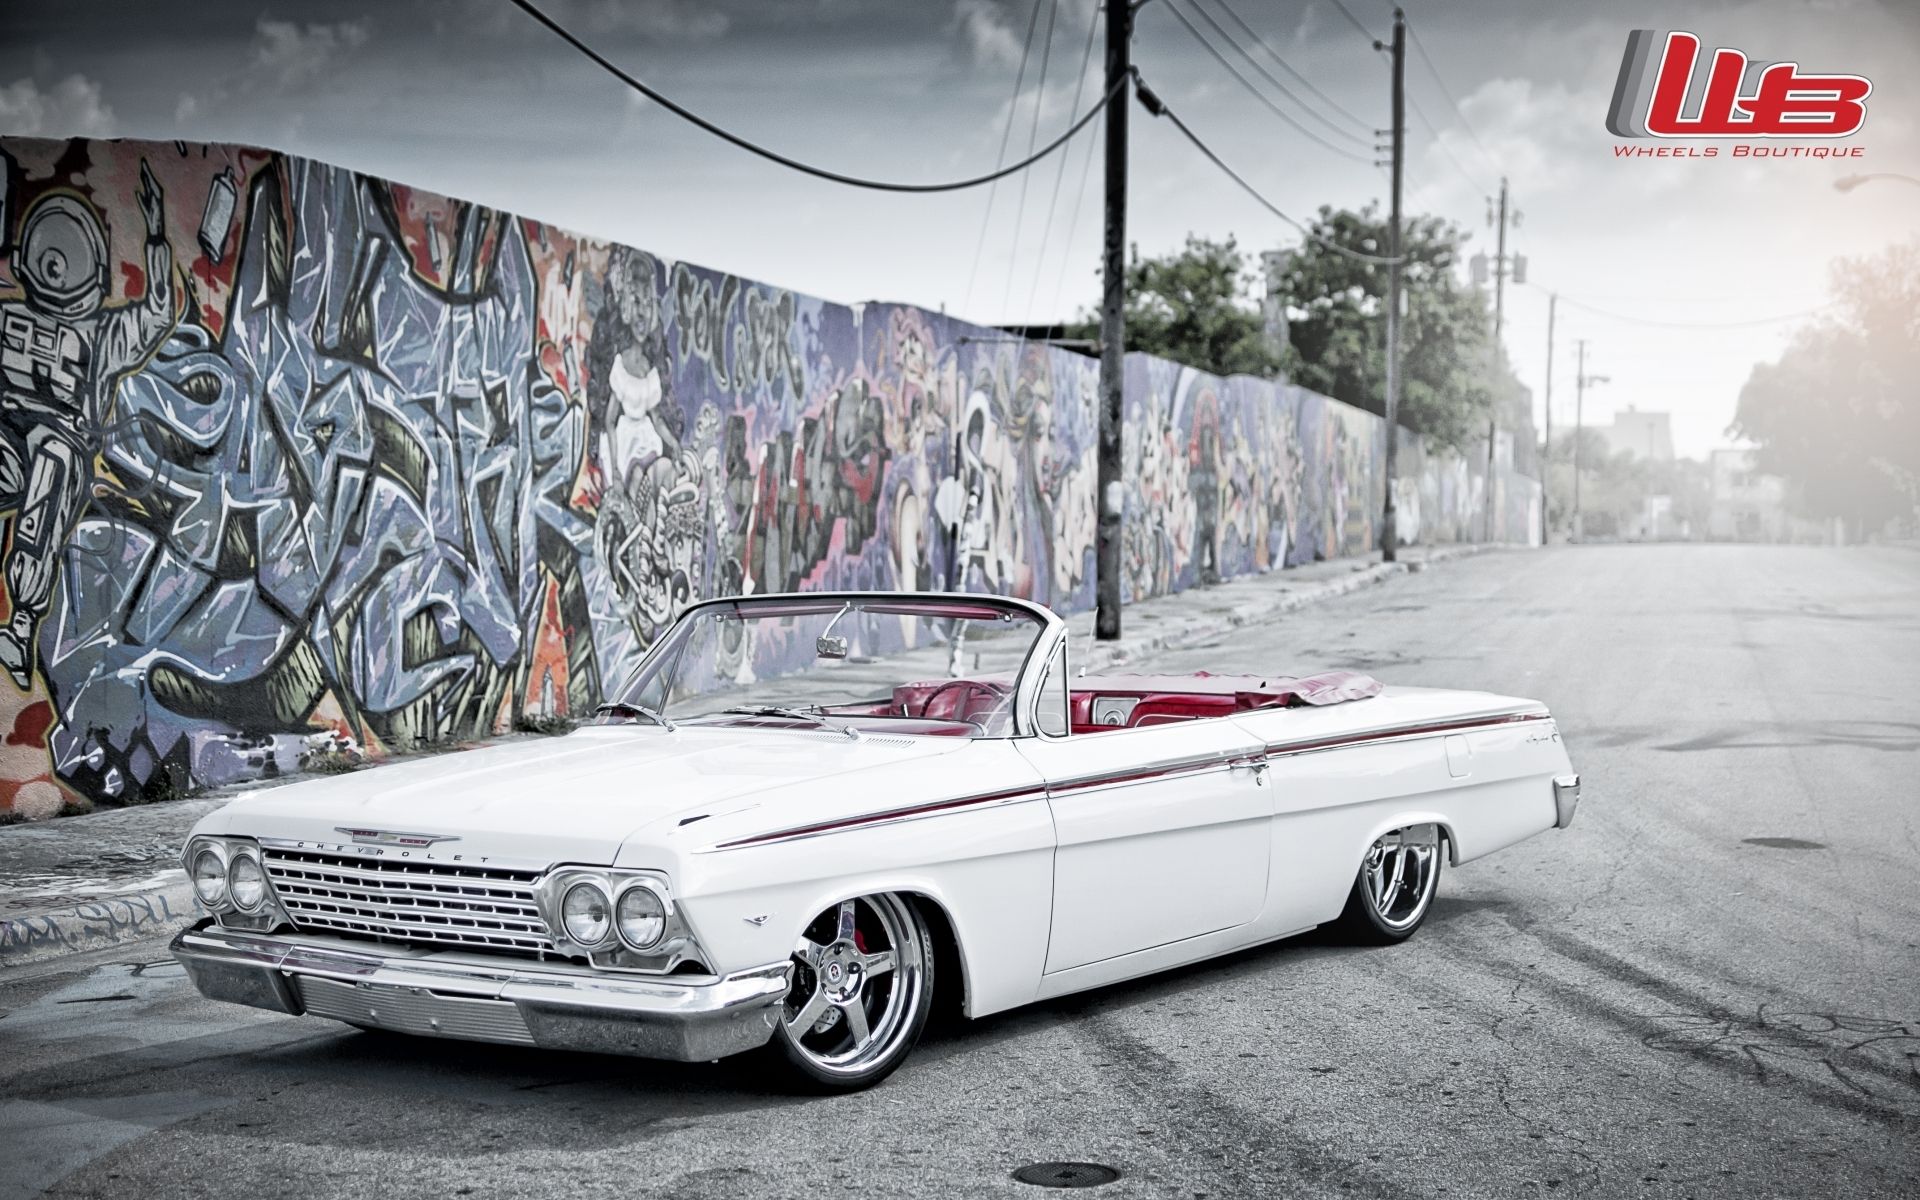 Chevrolet Impala #248659 | Full HD Widescreen wallpapers for ...